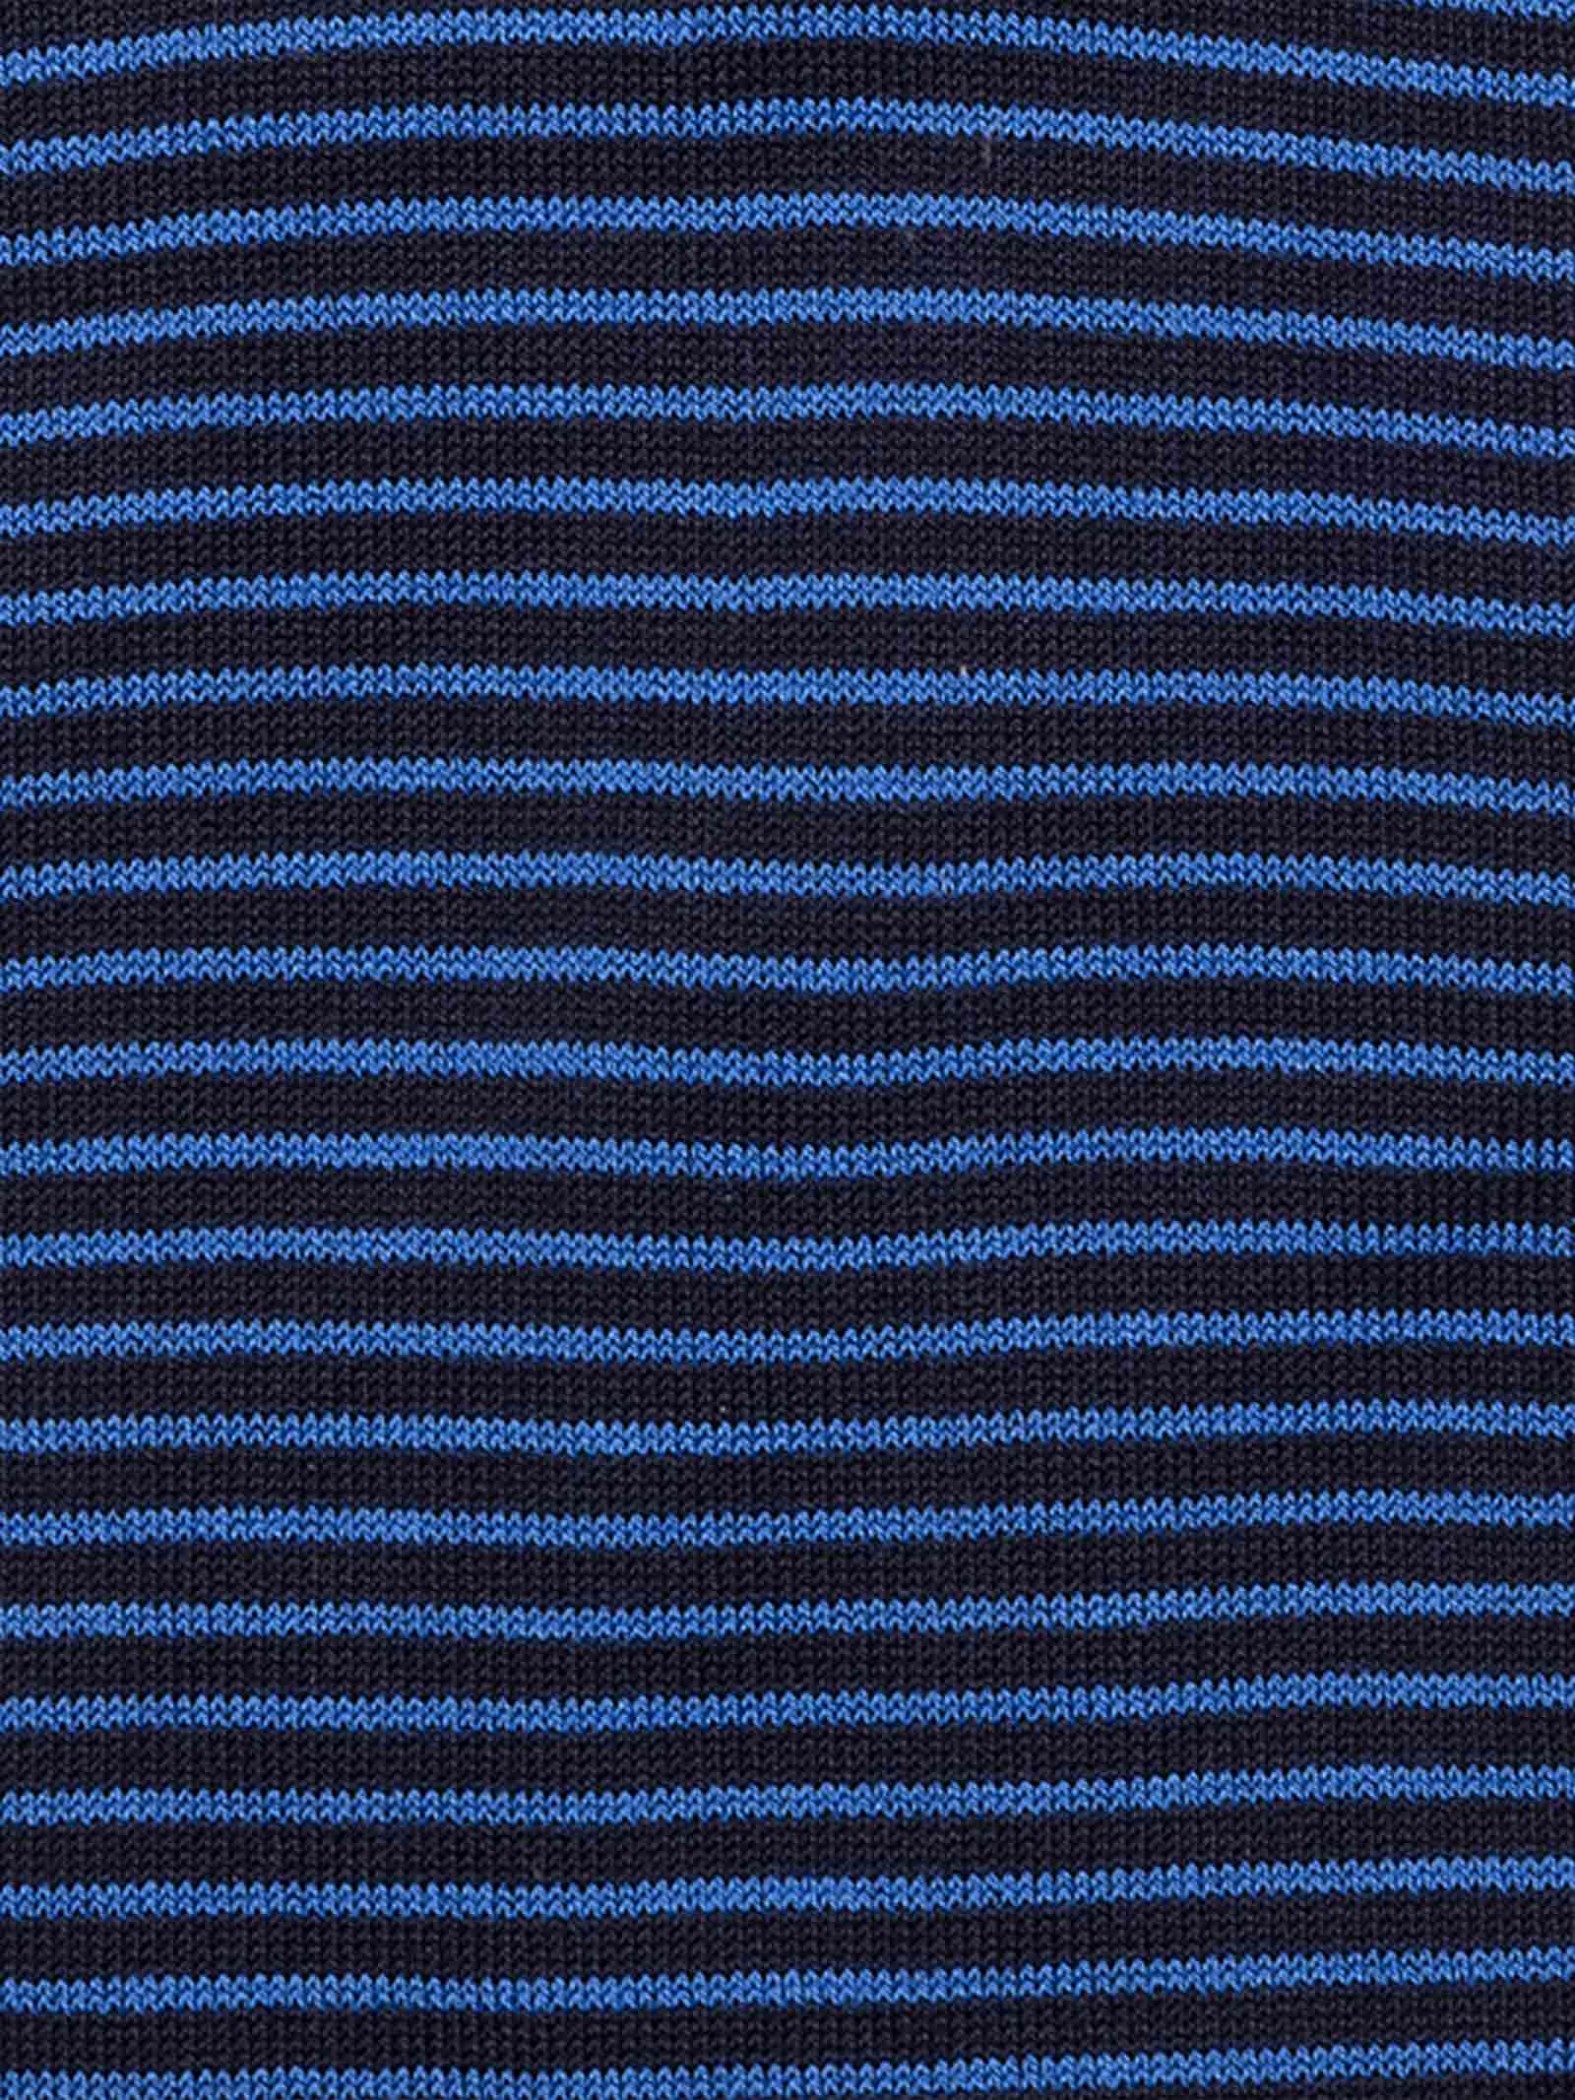 Men's striped patterned knee-high socks in cool cotton - Made in Italy